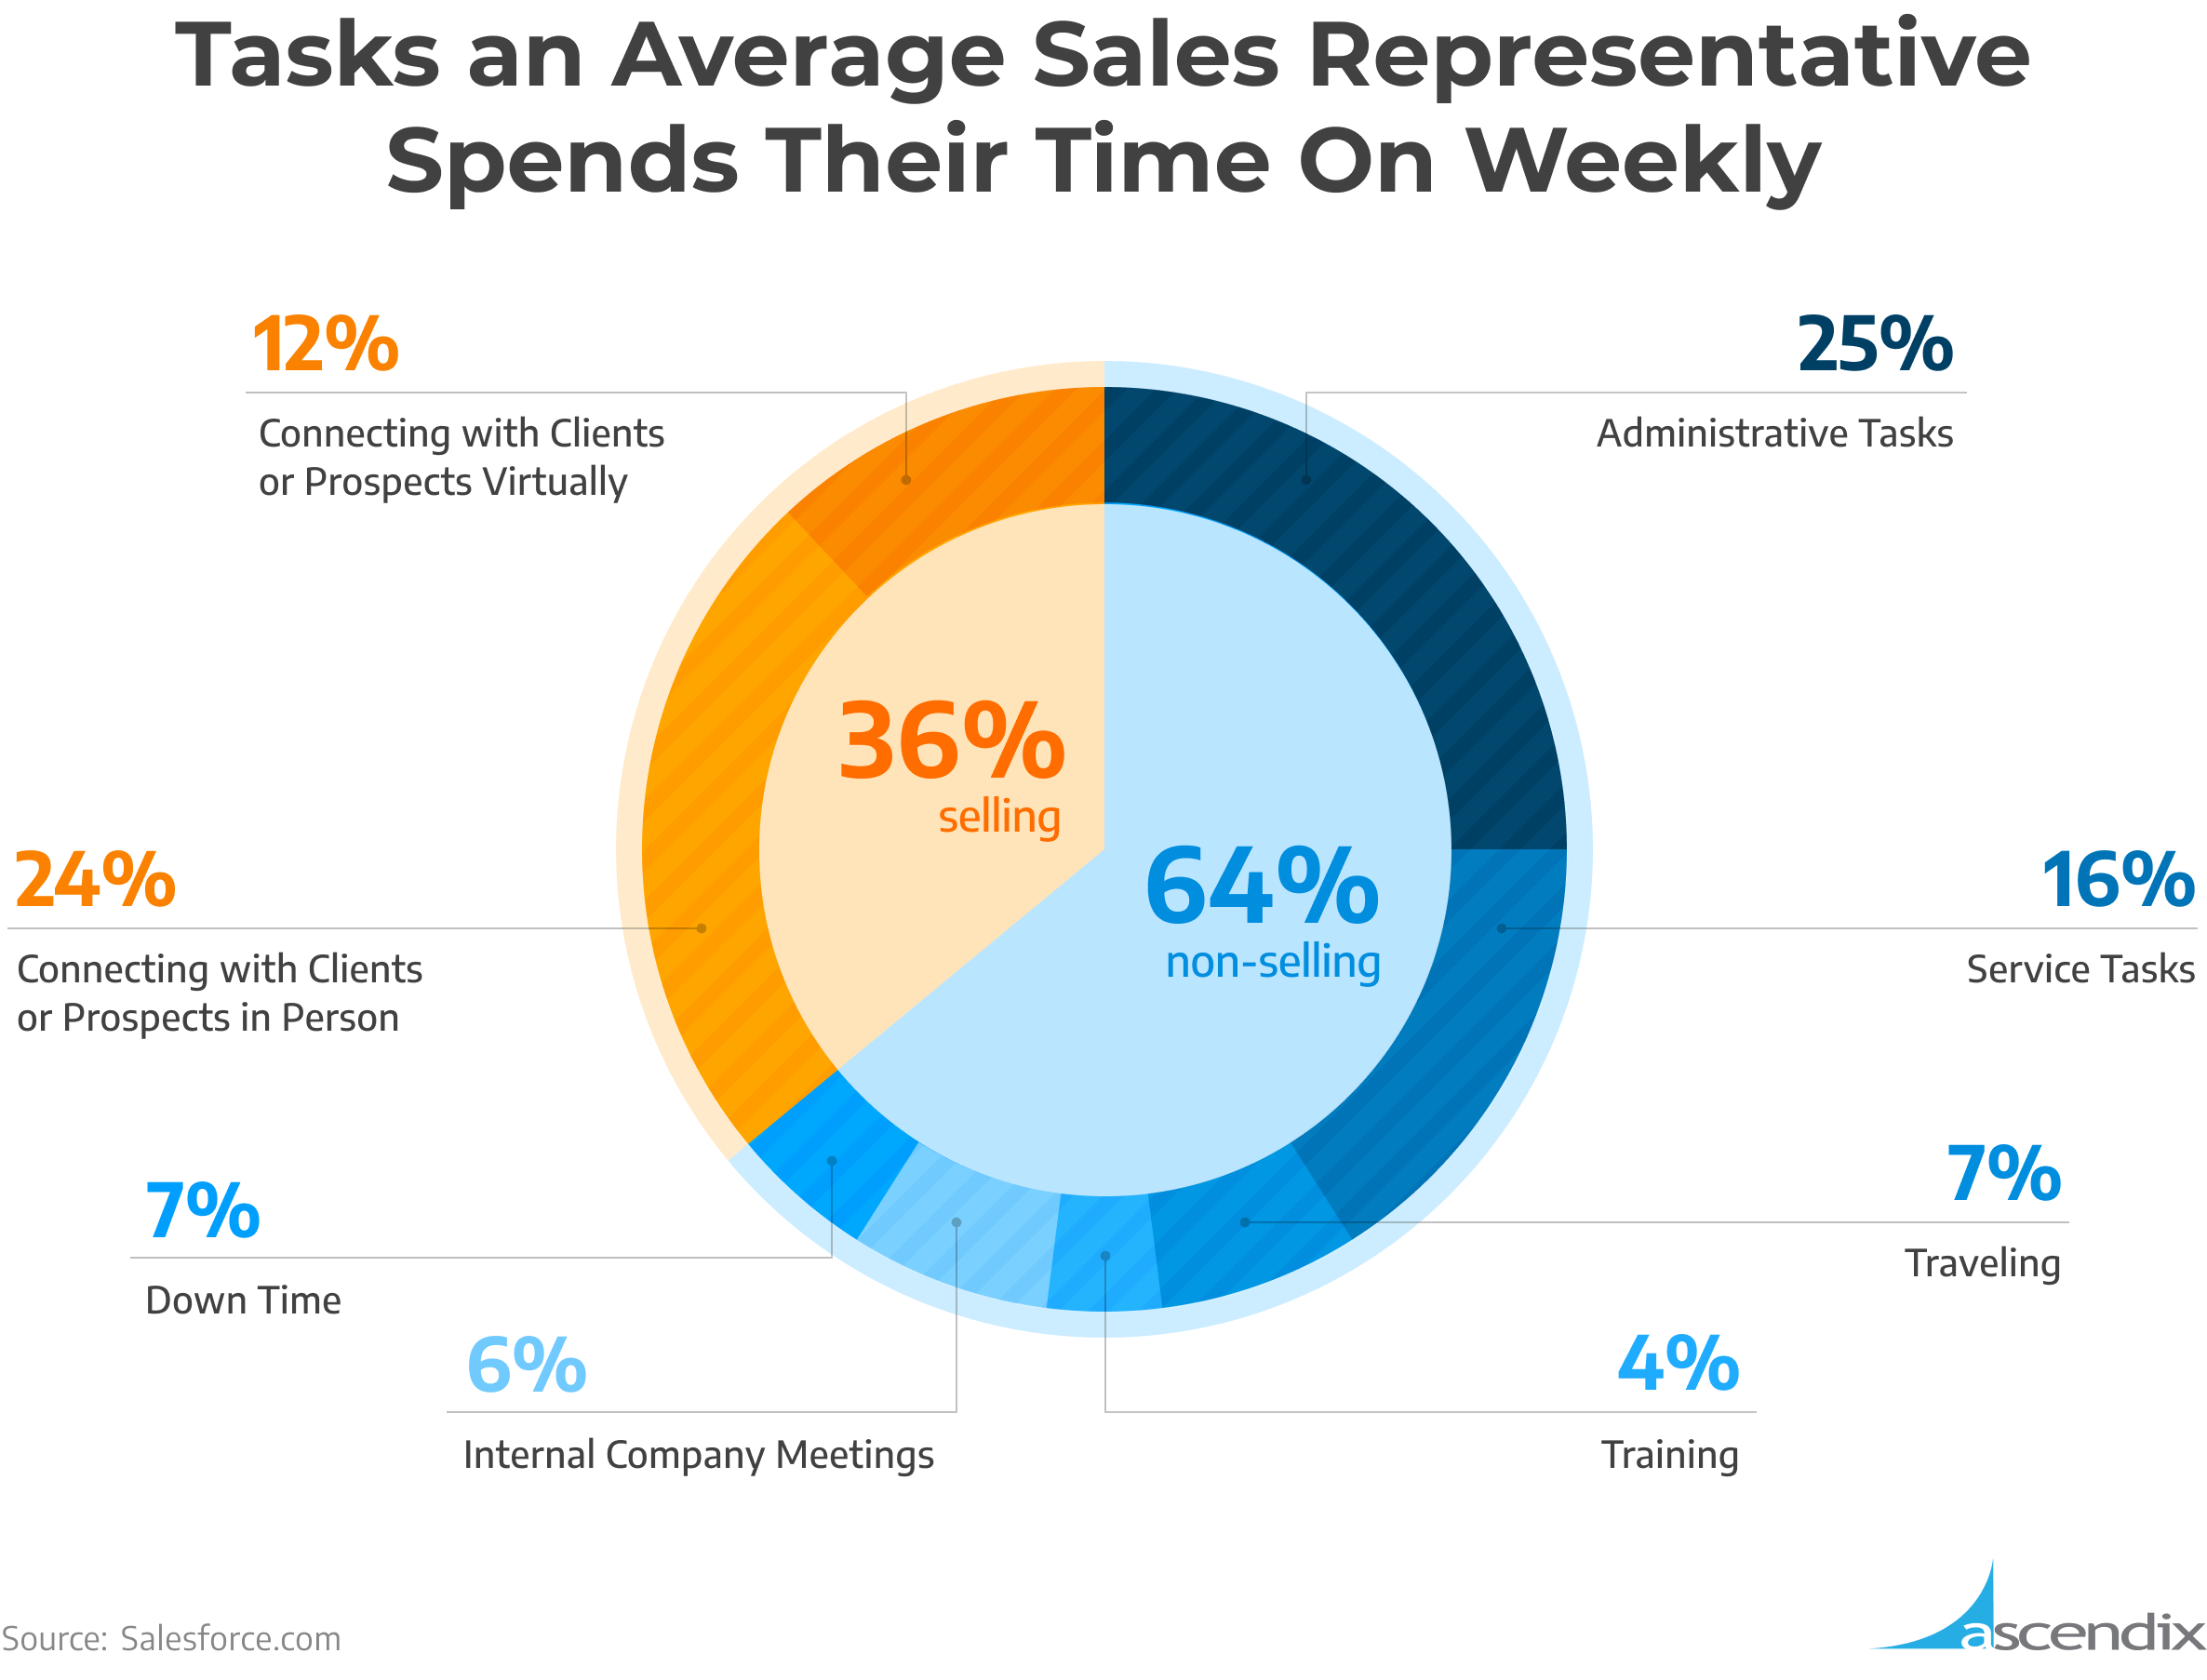 Tasks an Average Sales Representative Spends Their Time On Weekly | Ascendix